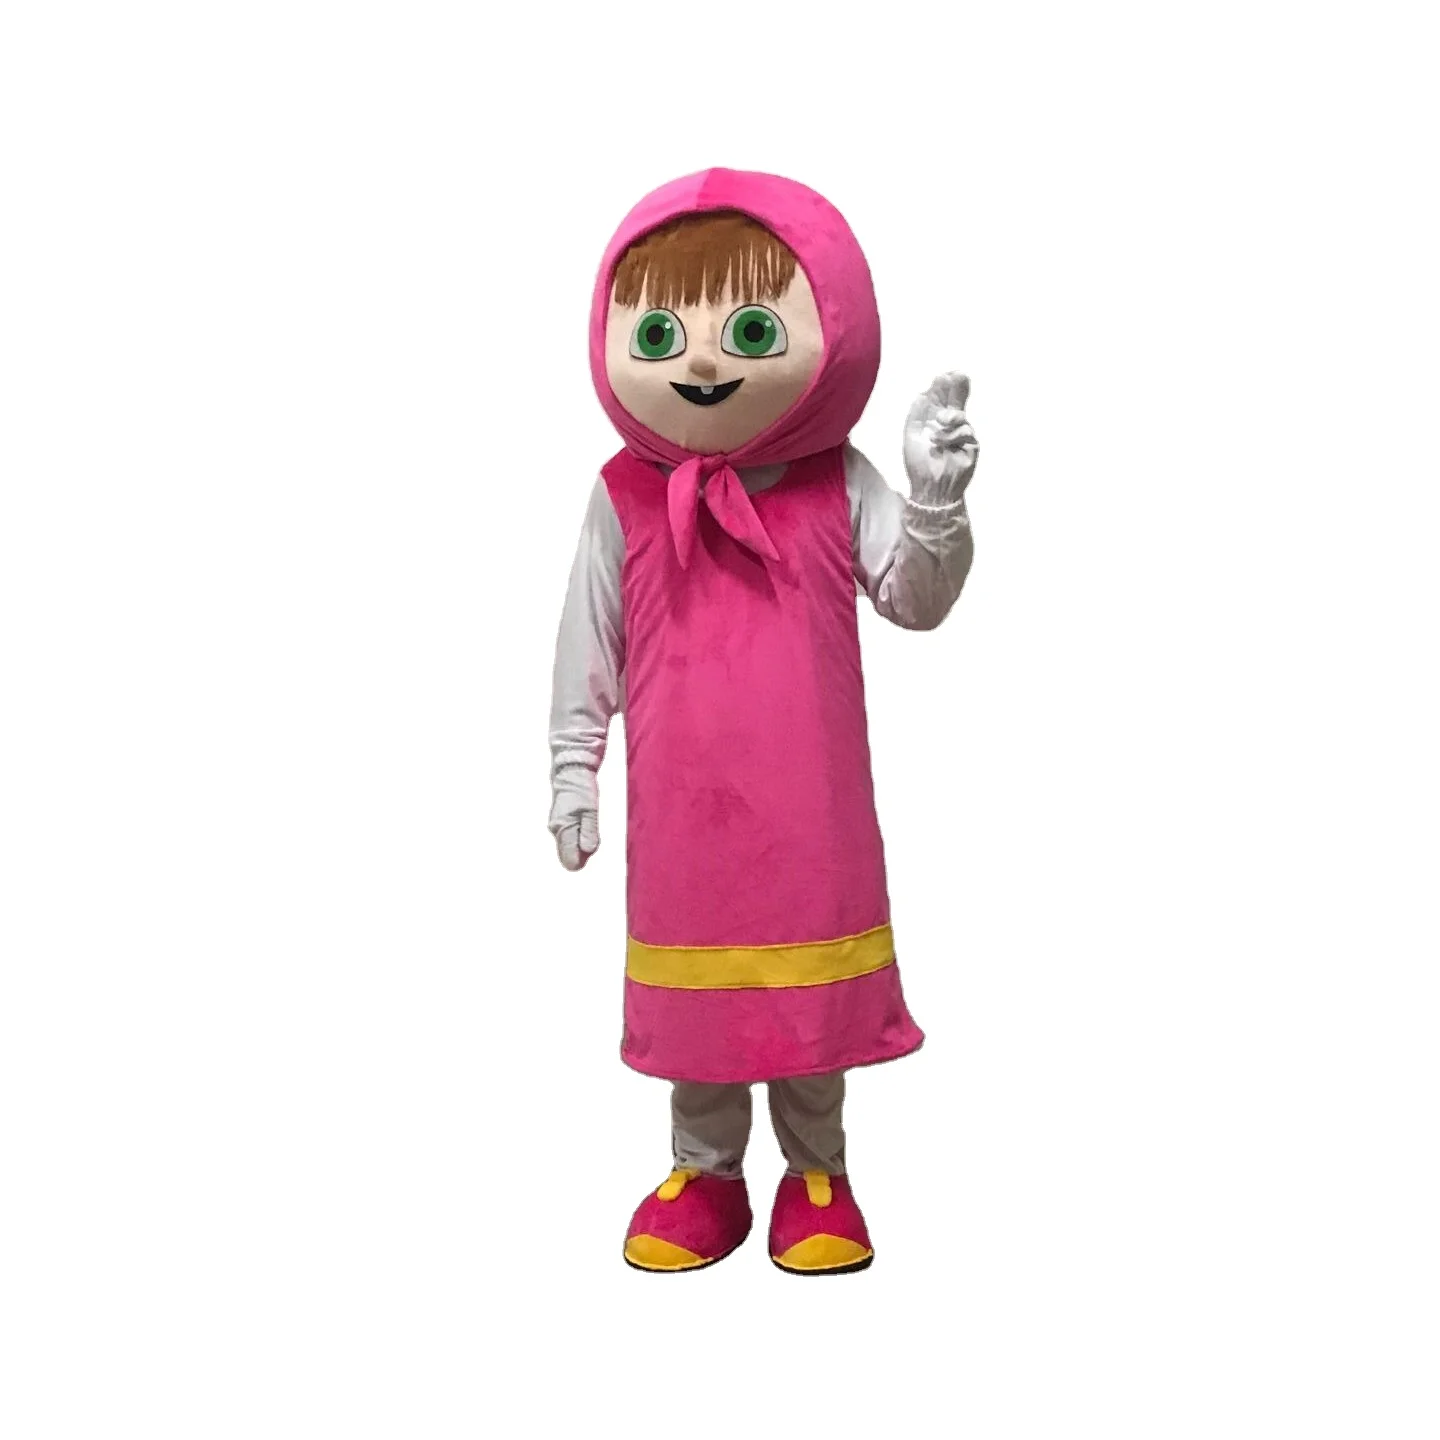 Popular Cartoon Character Furry Adult Masha And The Bear Mascot Costumes  For Sale - Buy Adult Masha And The Bear Mascot Costumes,Cartoon Mascot  Costume Adult,Furry Mascot Costume Product on 